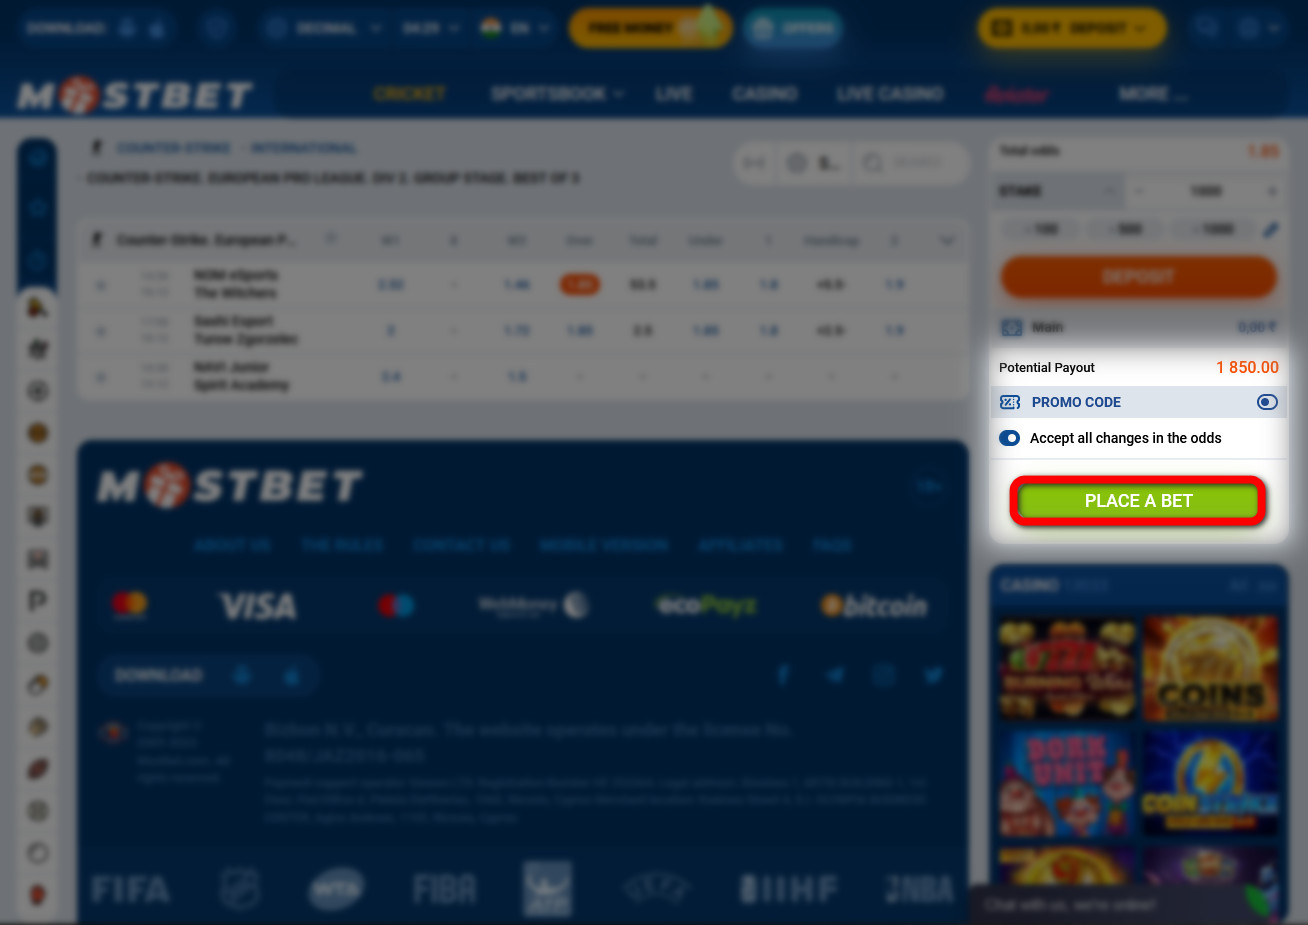 On the Mostbet website, check the outcome and bet amount and confirm it.